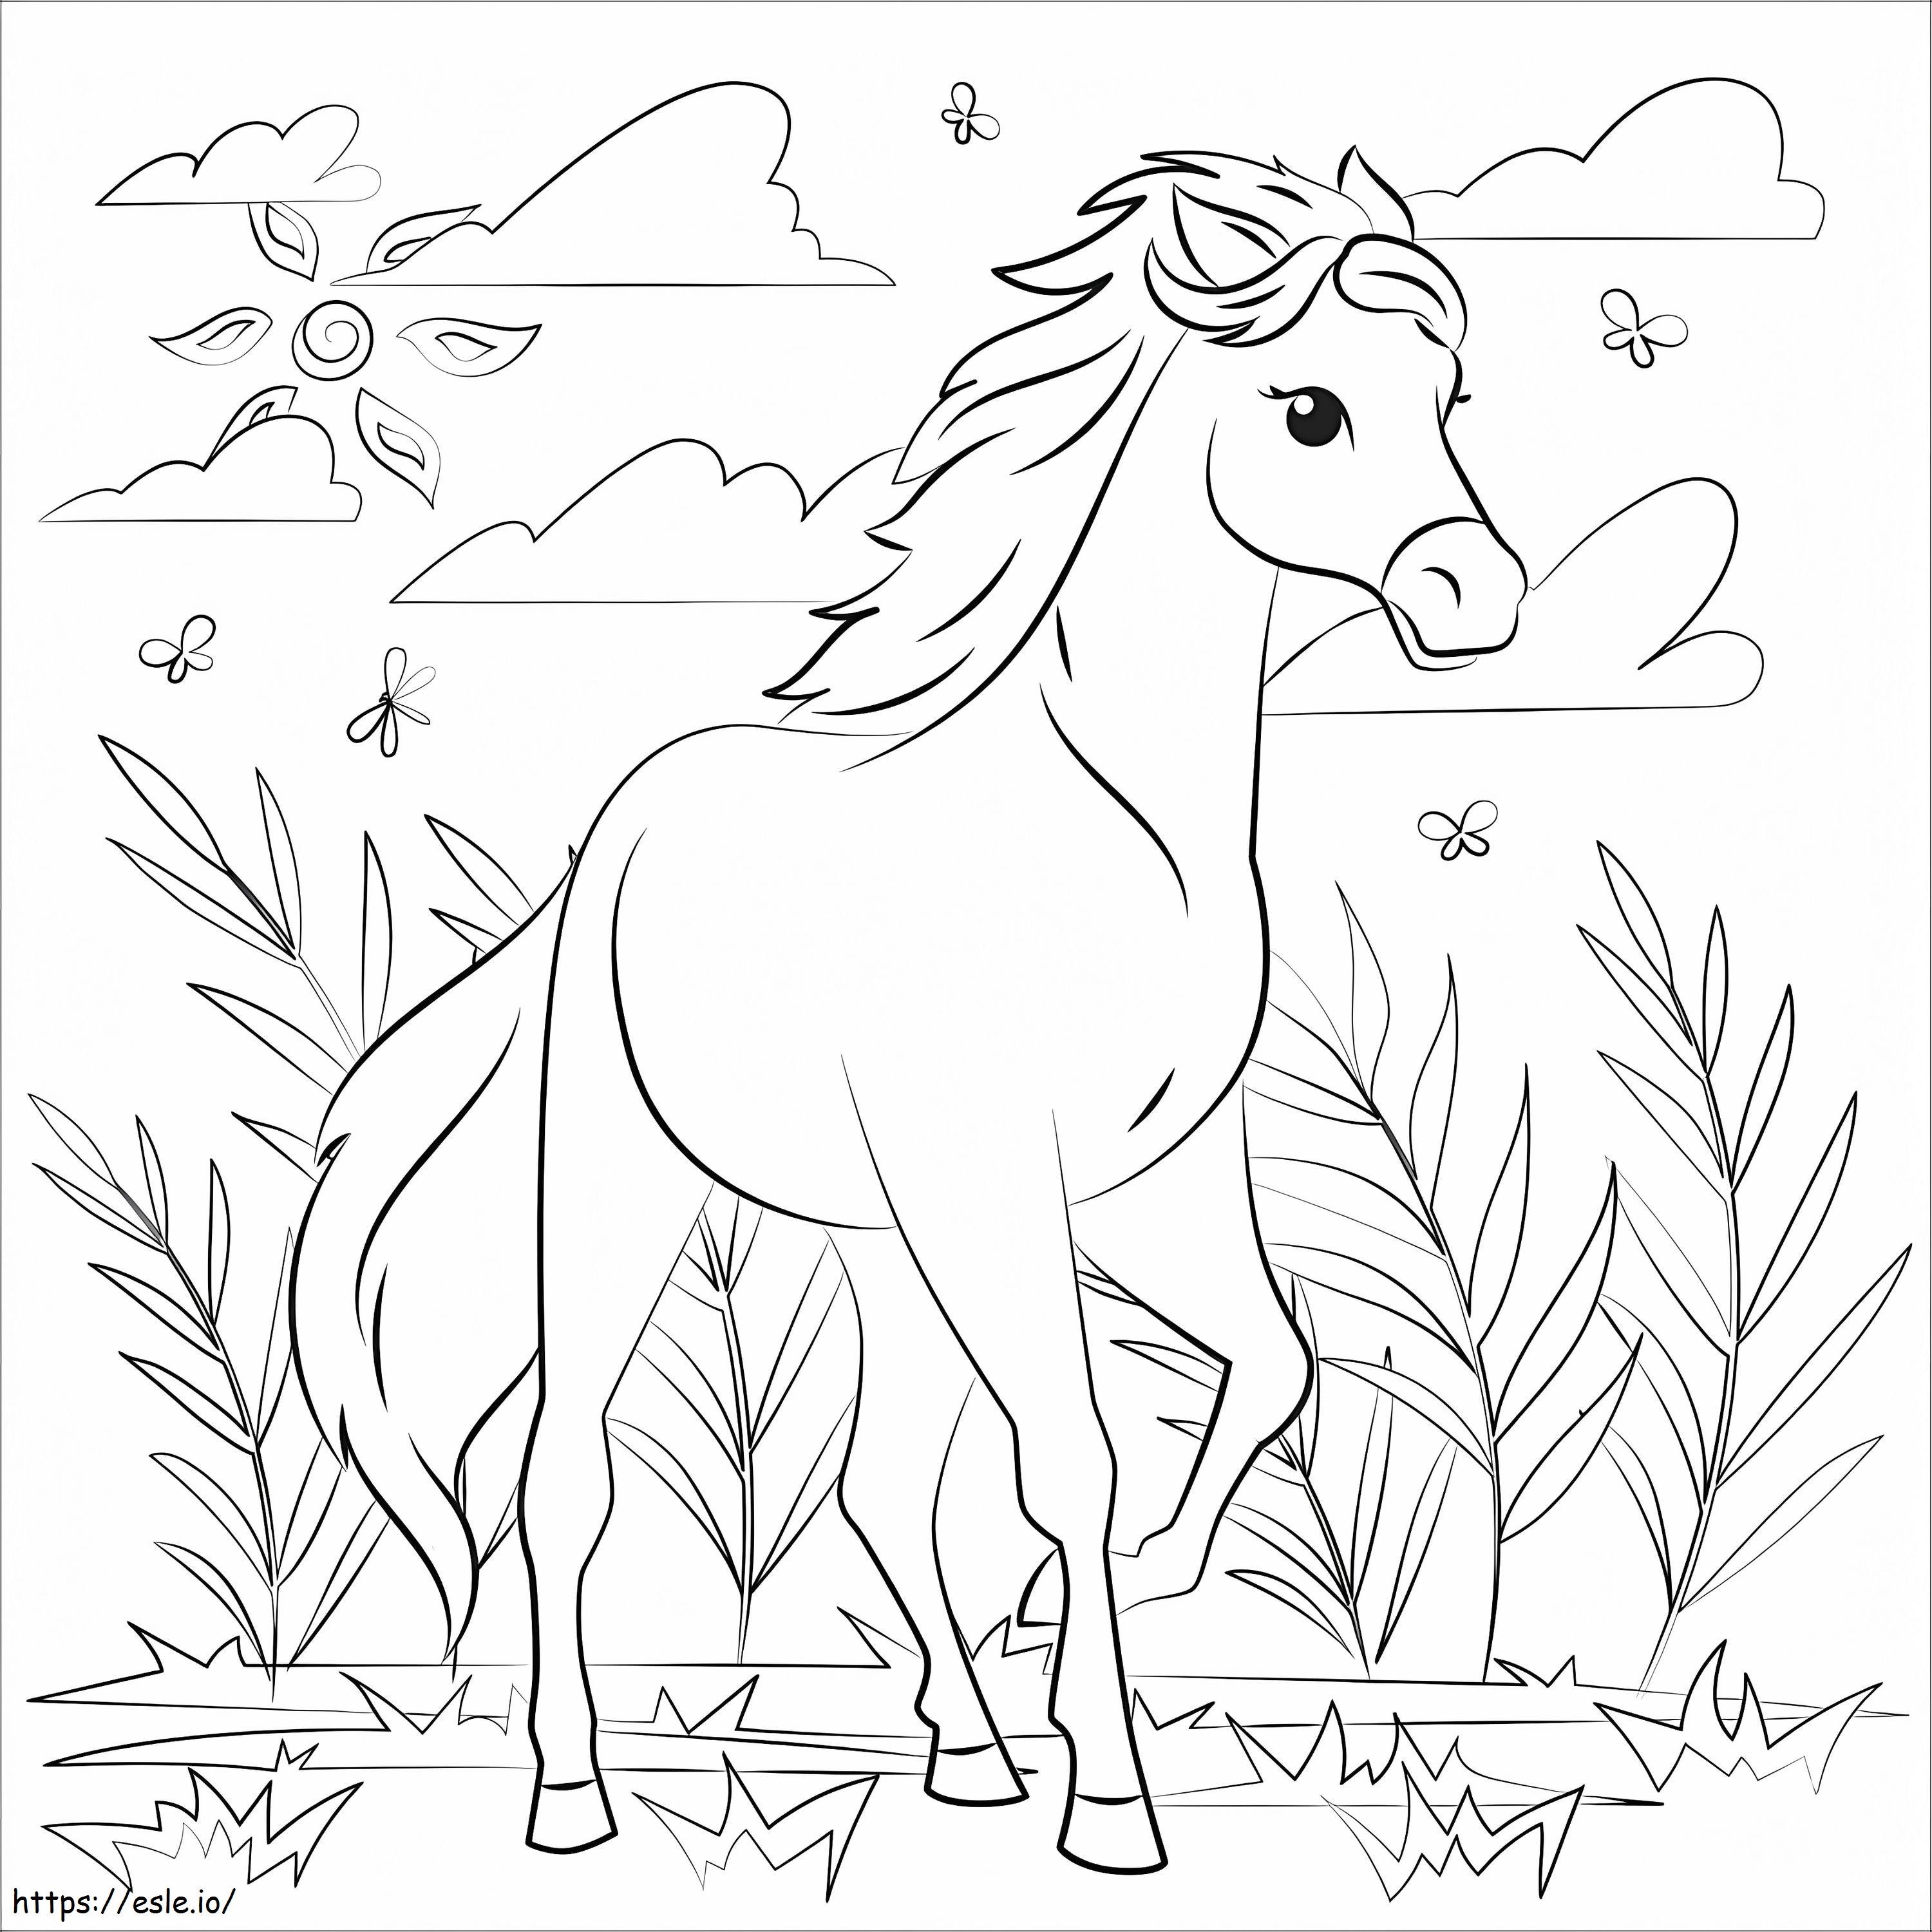 Cool mustang horse coloring page